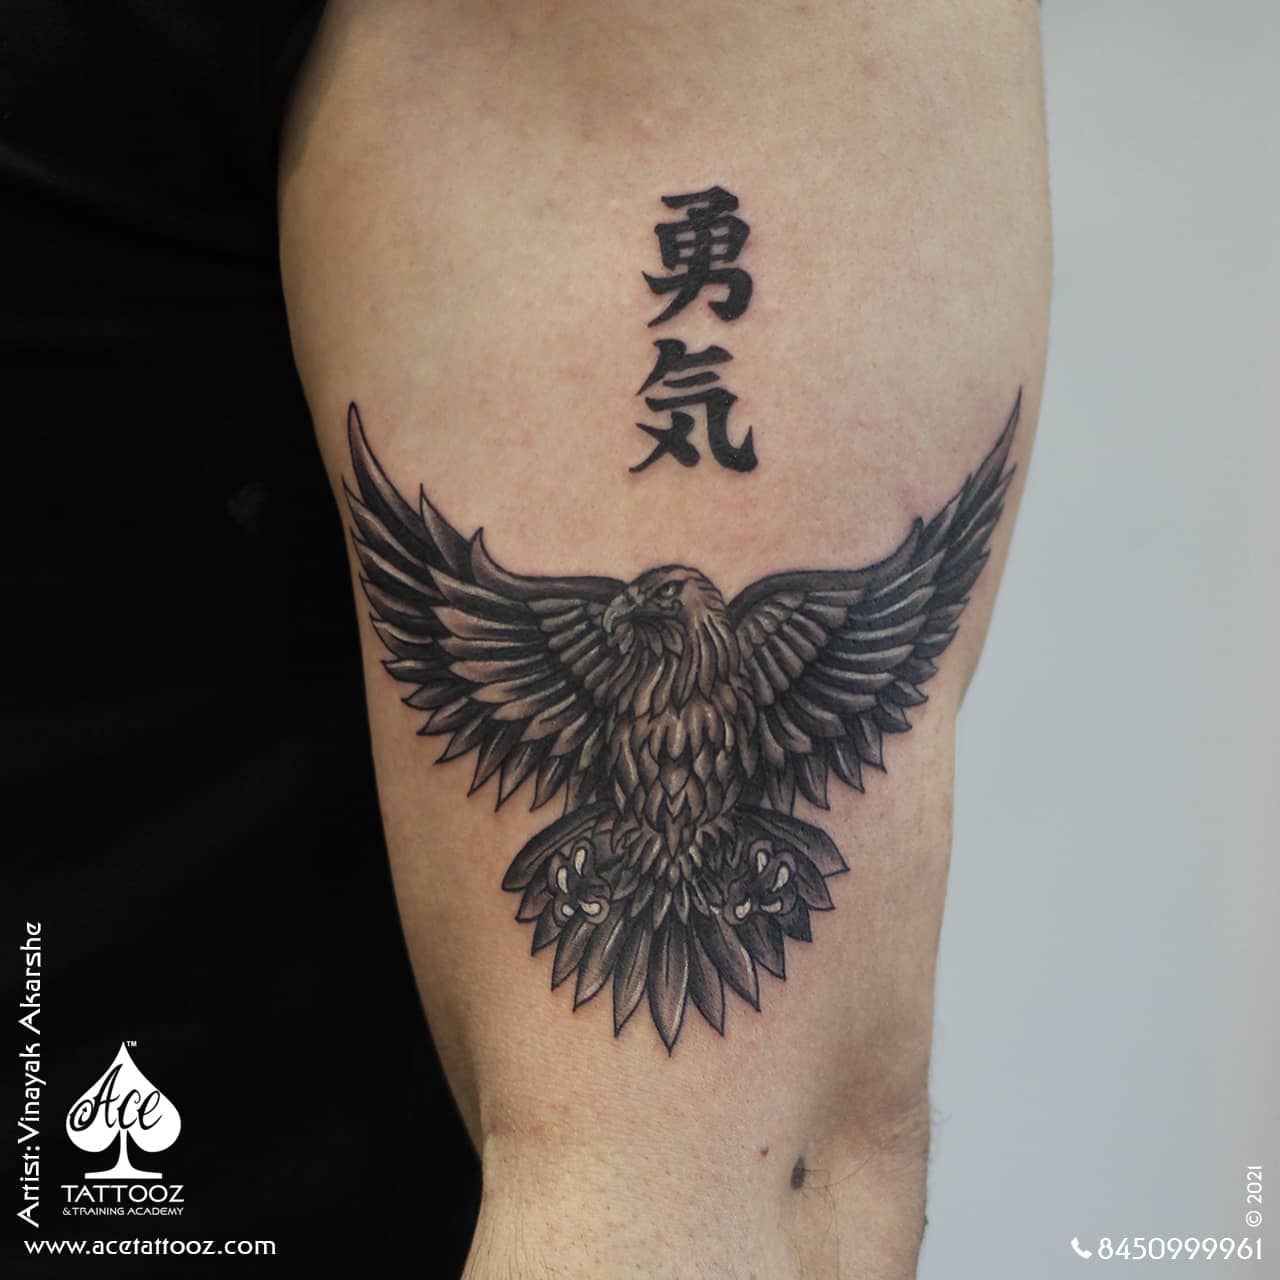 It takes courage to grow up and become who you really are.
The client wanted to write courage in one of the Language he loved the most and Got it done in the Japanese language 😍
Tattoo done by  @vinayak_b.e.a.r.d.e.d at @acetattooz

#tattoolife #tattoolovers #Tattoo #Tattoostudio #couragetattoo #mumbaiartist #mumbaitattoo #tattooworld #customizedtattoo #tattoodesign #tattooink #tattooideas #tattoolifestyle